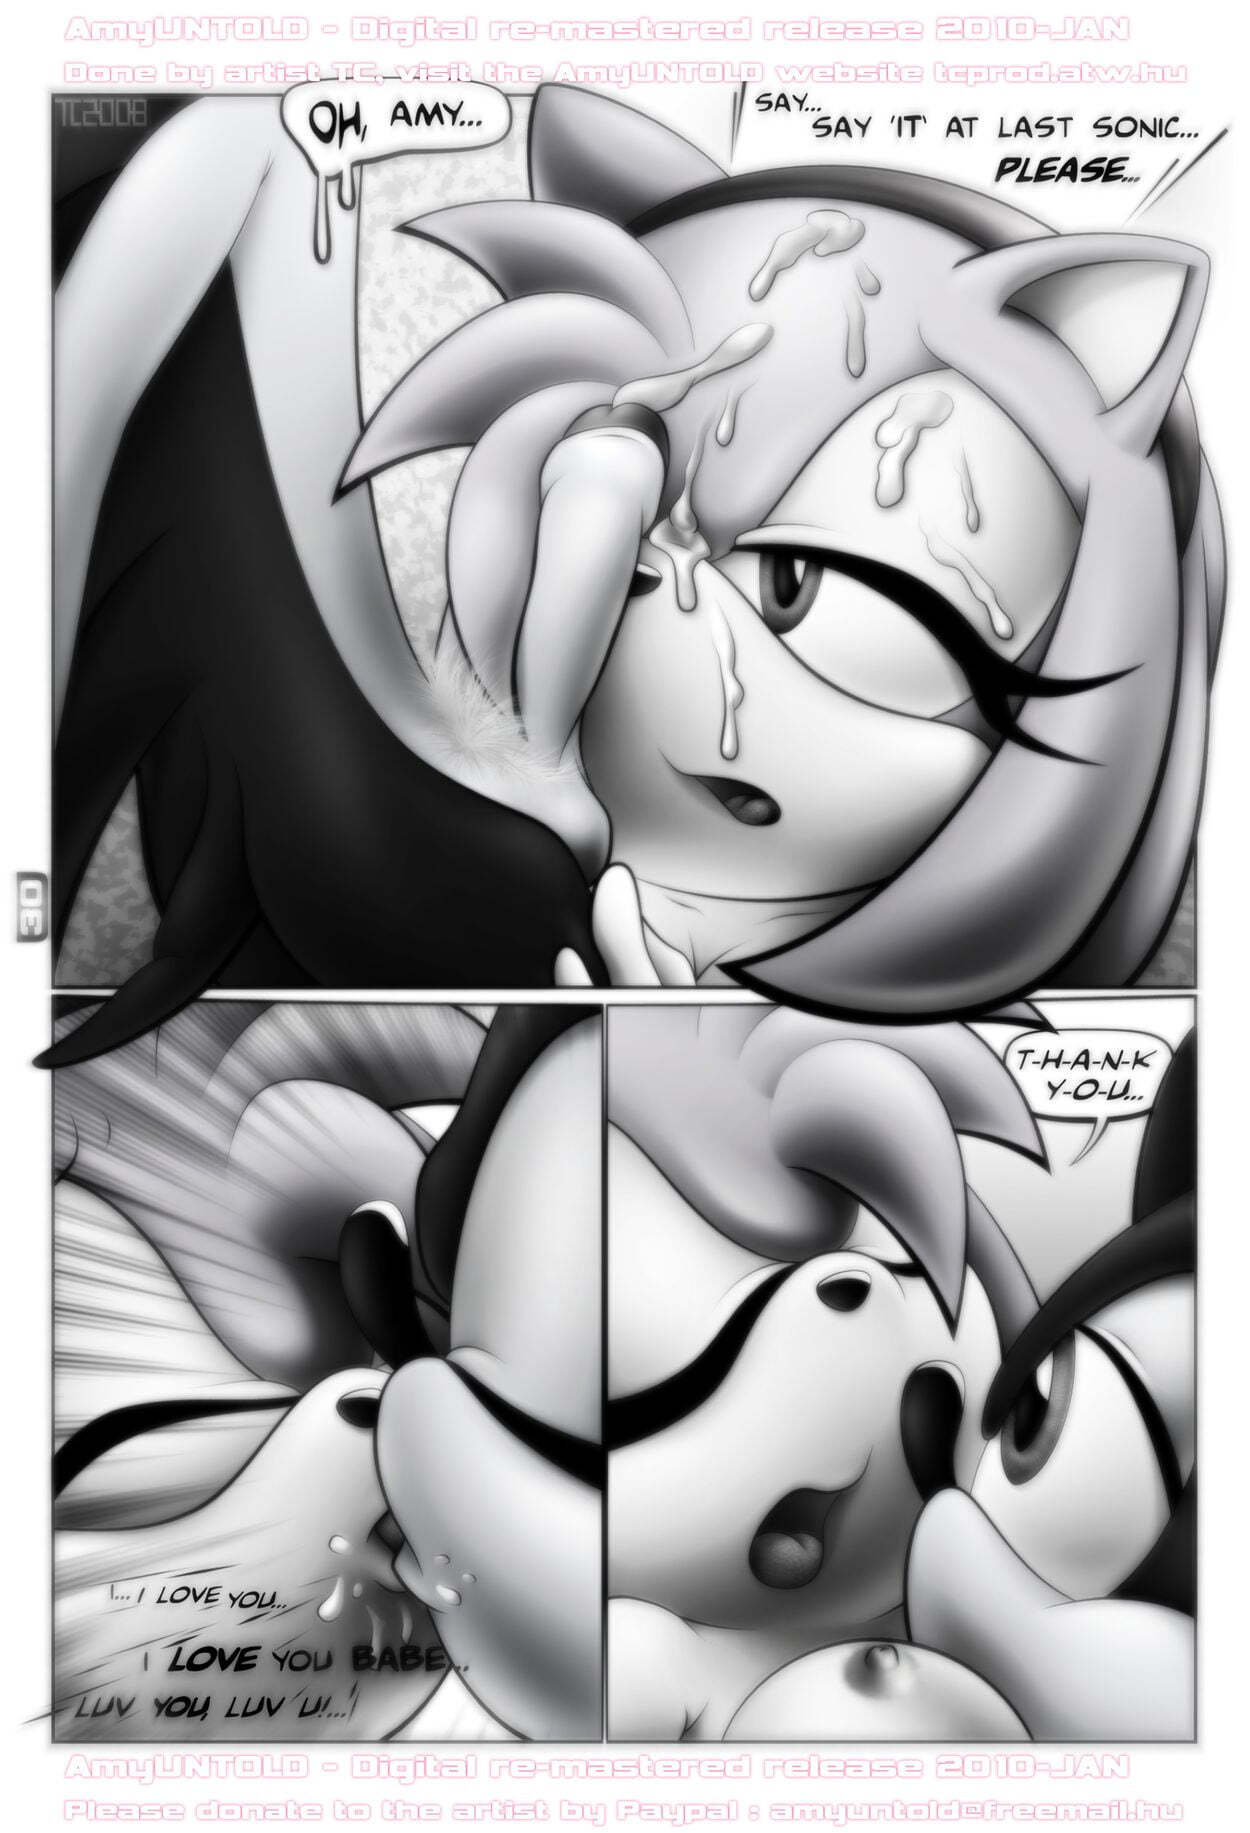 Amy Untold - Finally - Page 30